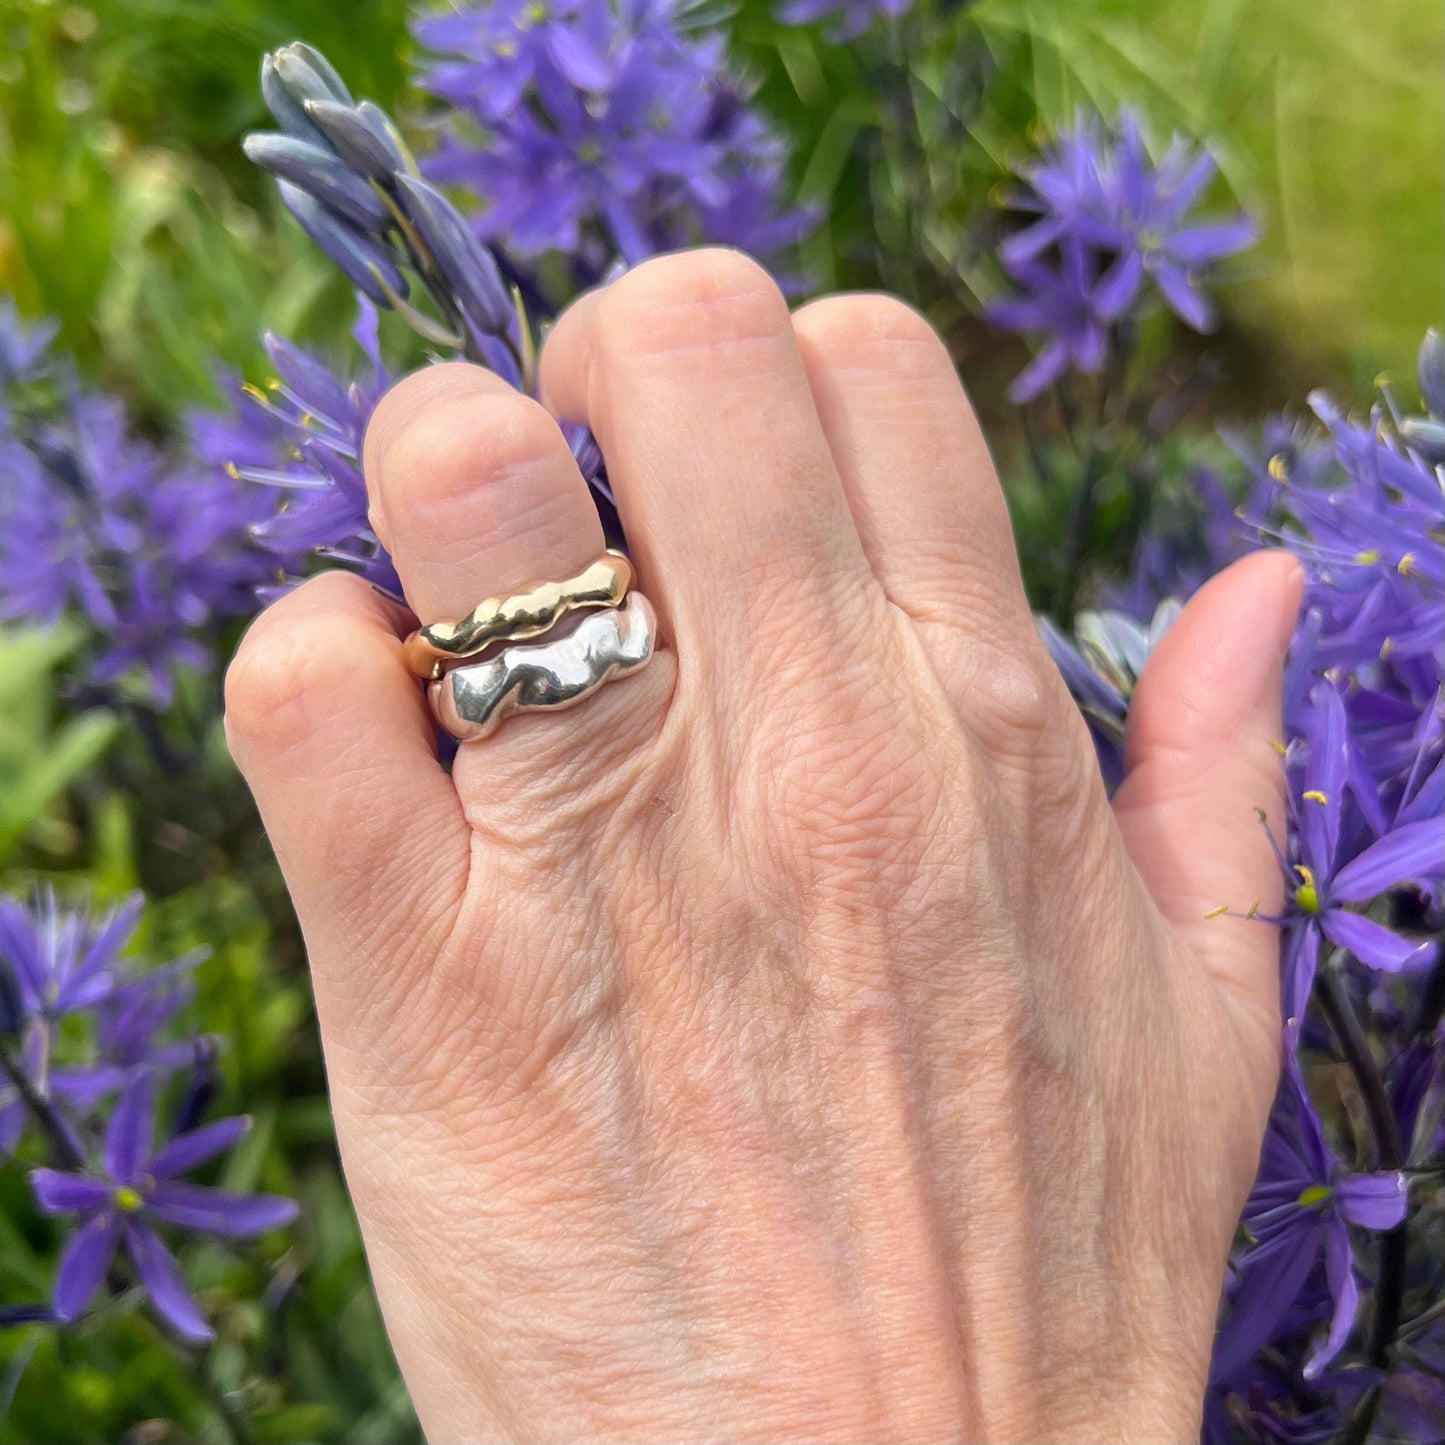 A sterling silver wave band and a gold bubble ring on a hand with a background of purple flowers.